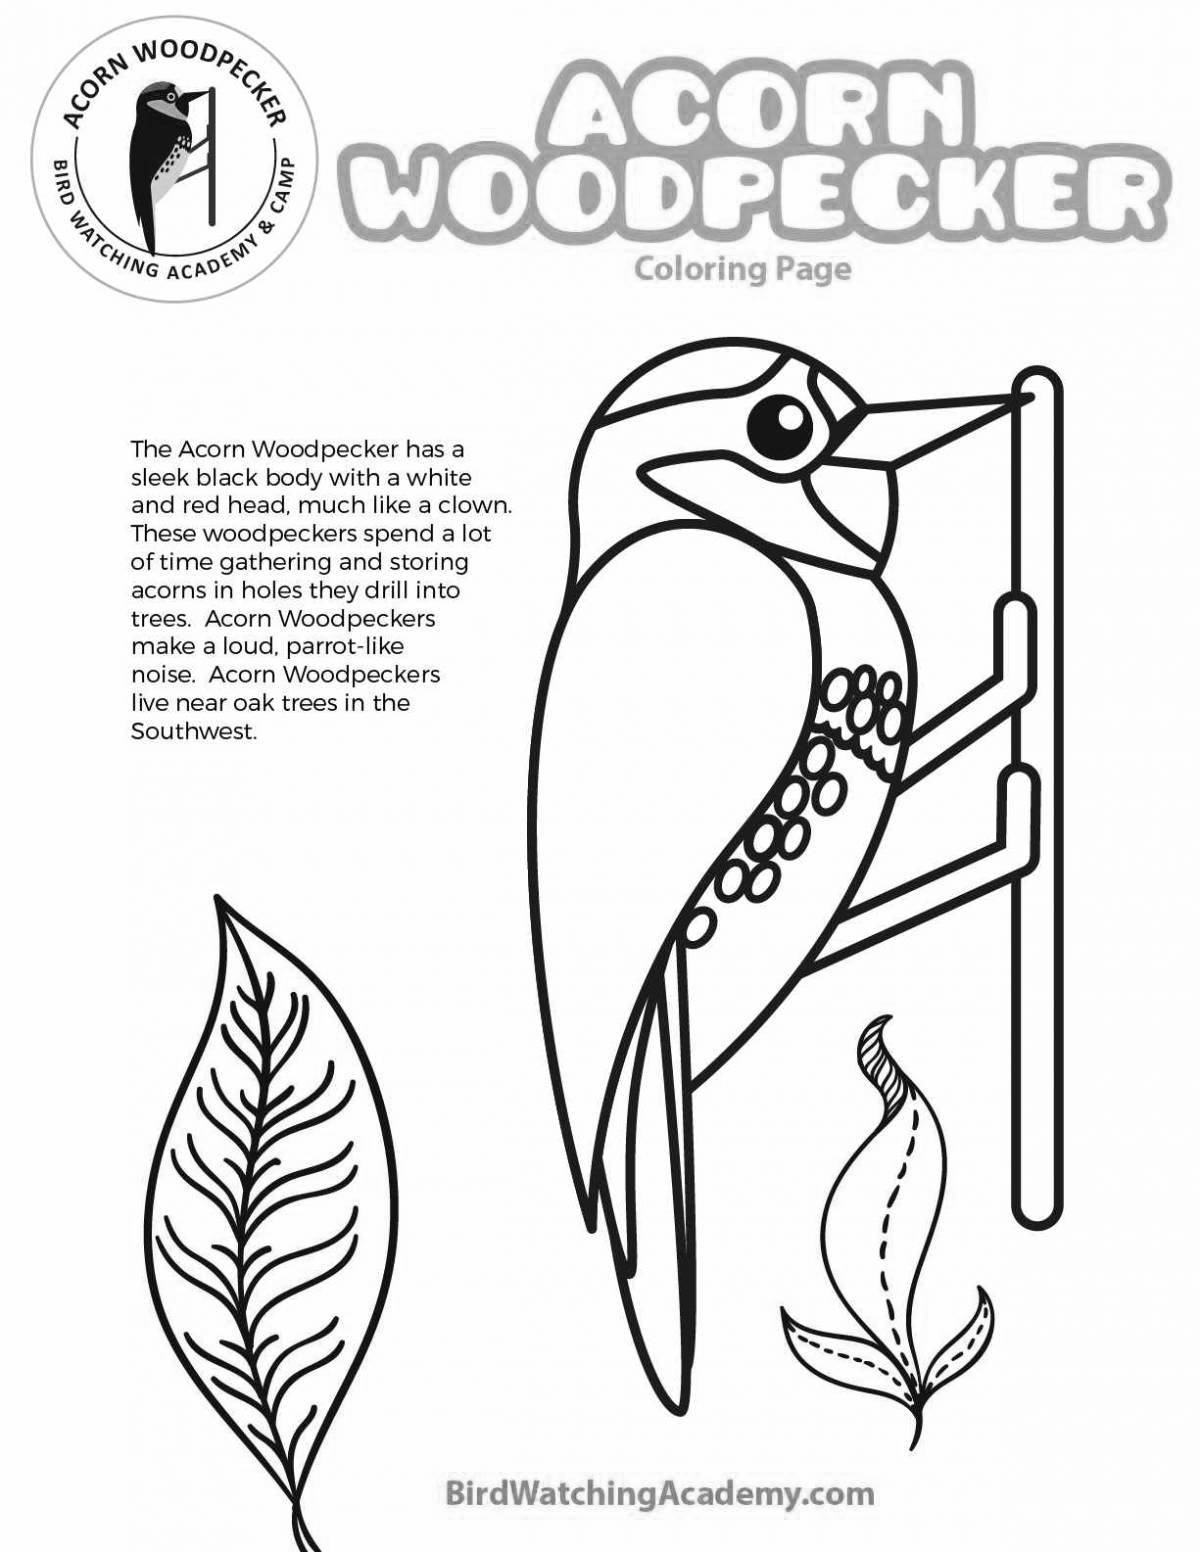 Radiant woodpecker coloring book for children 6-7 years old